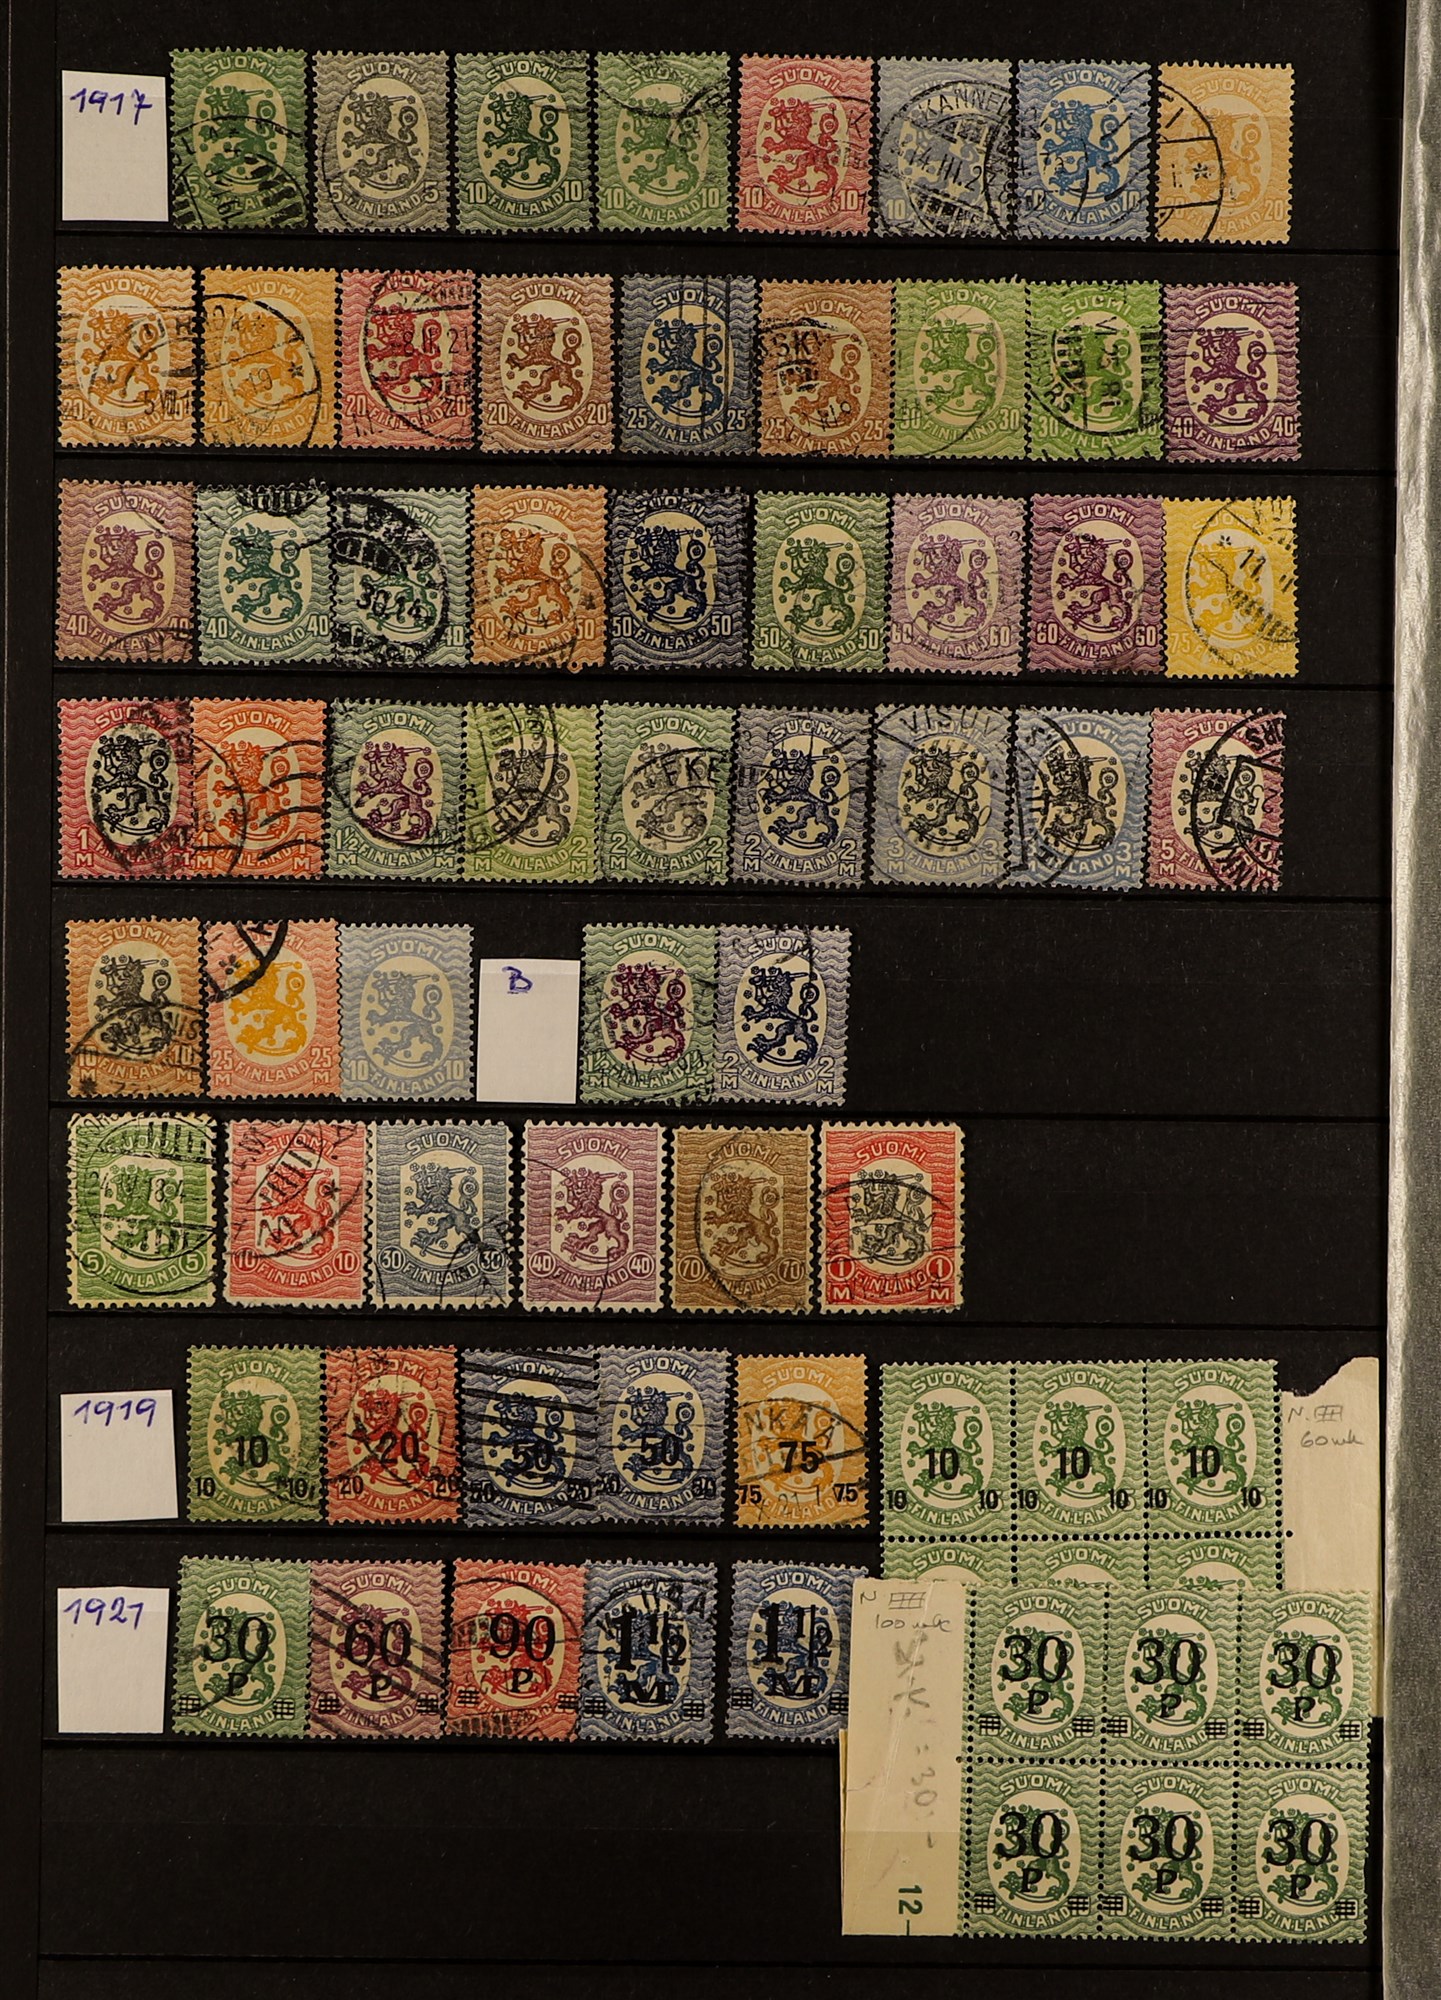 FINLAND 1860 - 2010's ACCUMULATION IN CARTON of mint / never hinged mint & used stamps and miniature - Image 24 of 34